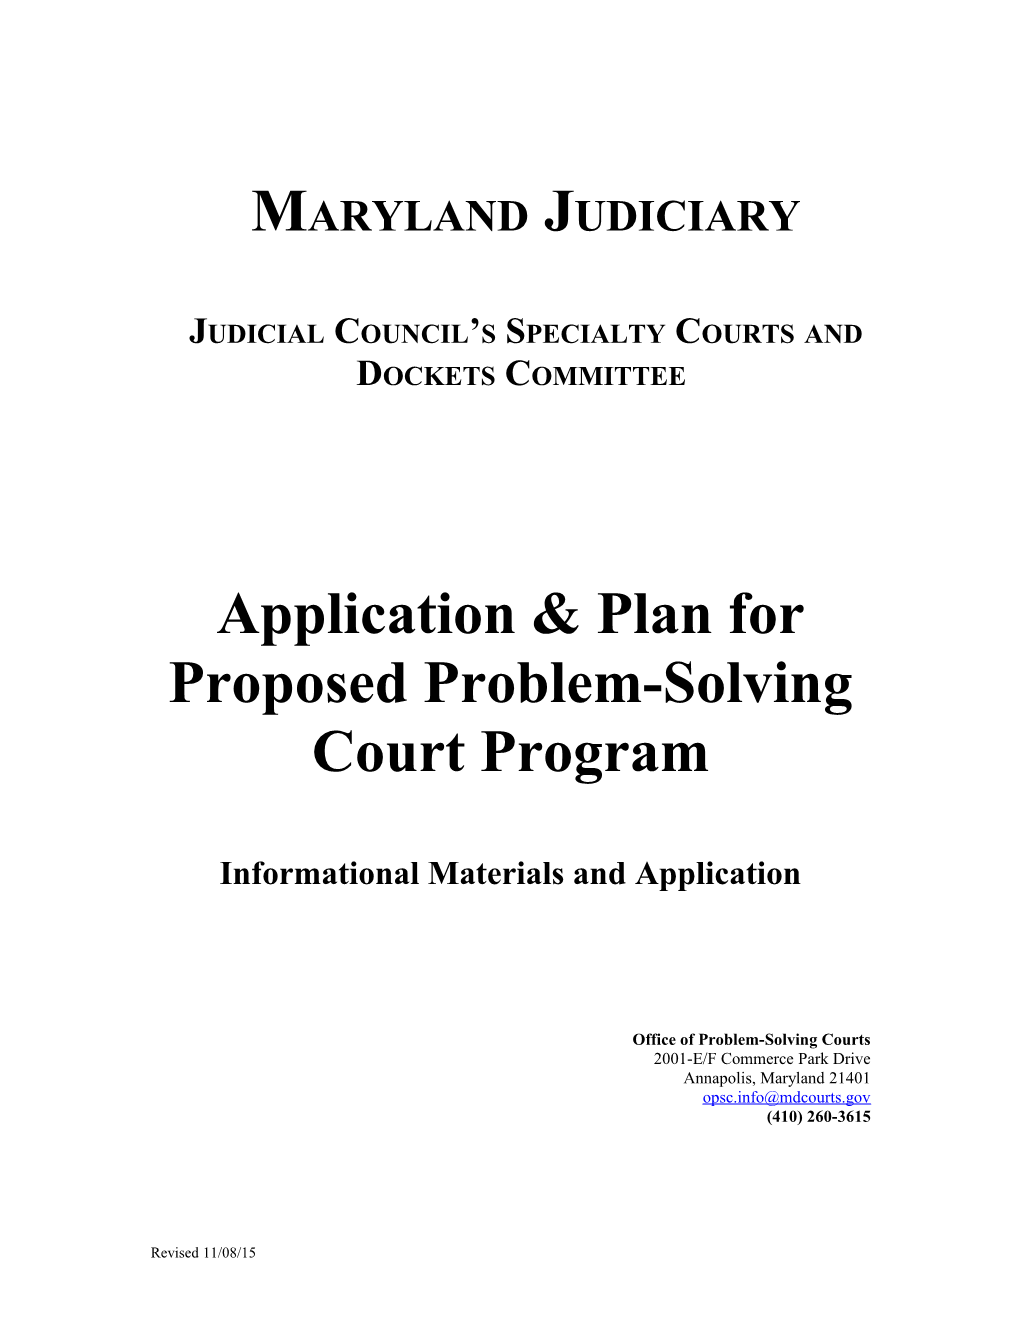 Maryland Mental Health Treatment Courts